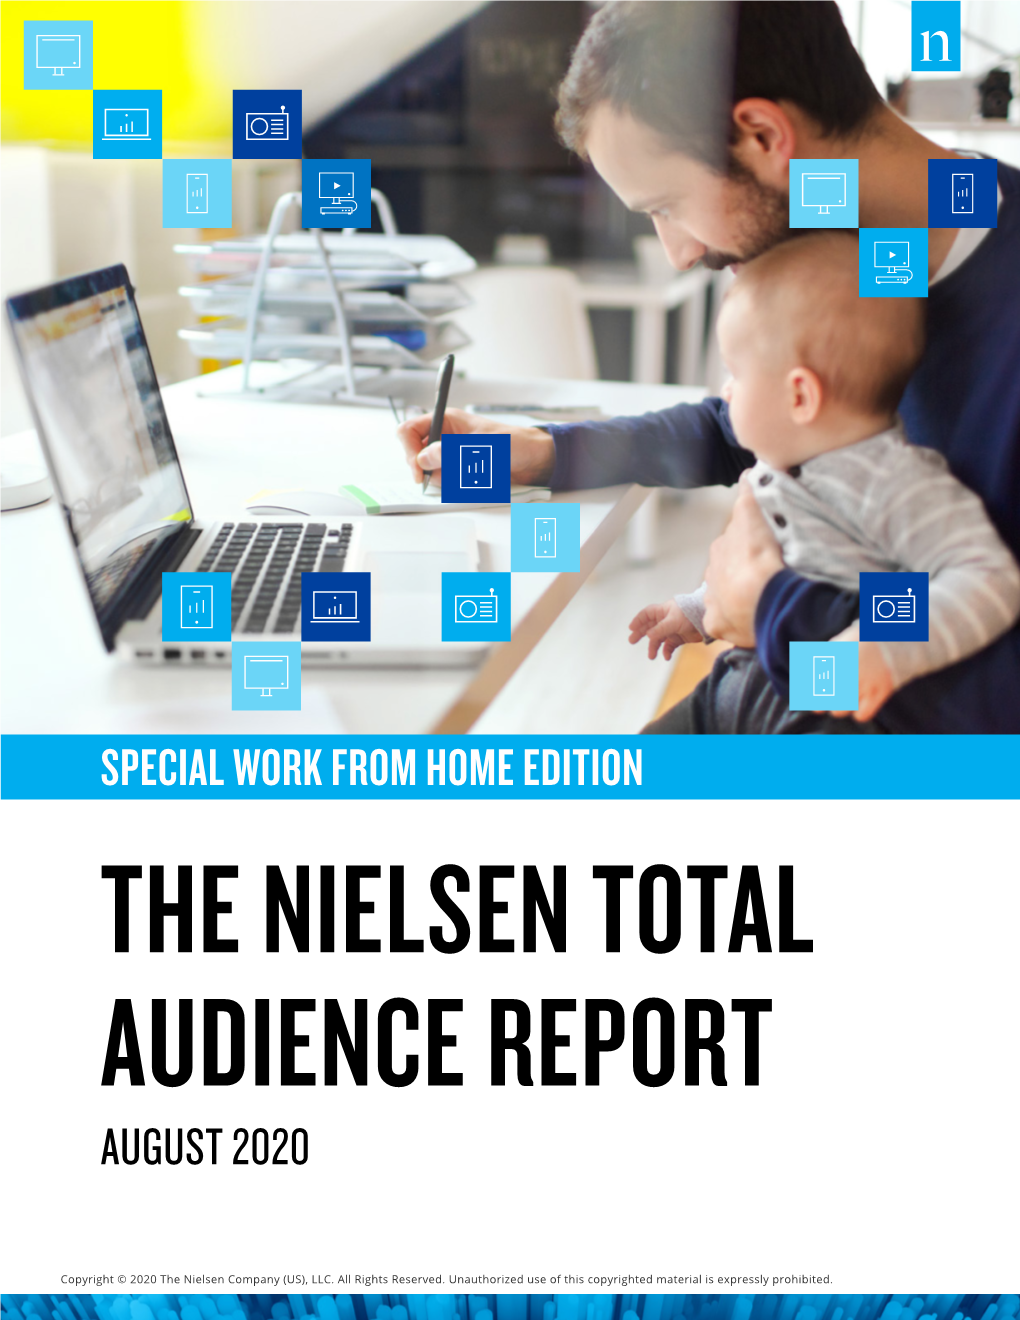 Special Work from Home Edition the Nielsen Total Audience Report August 2020